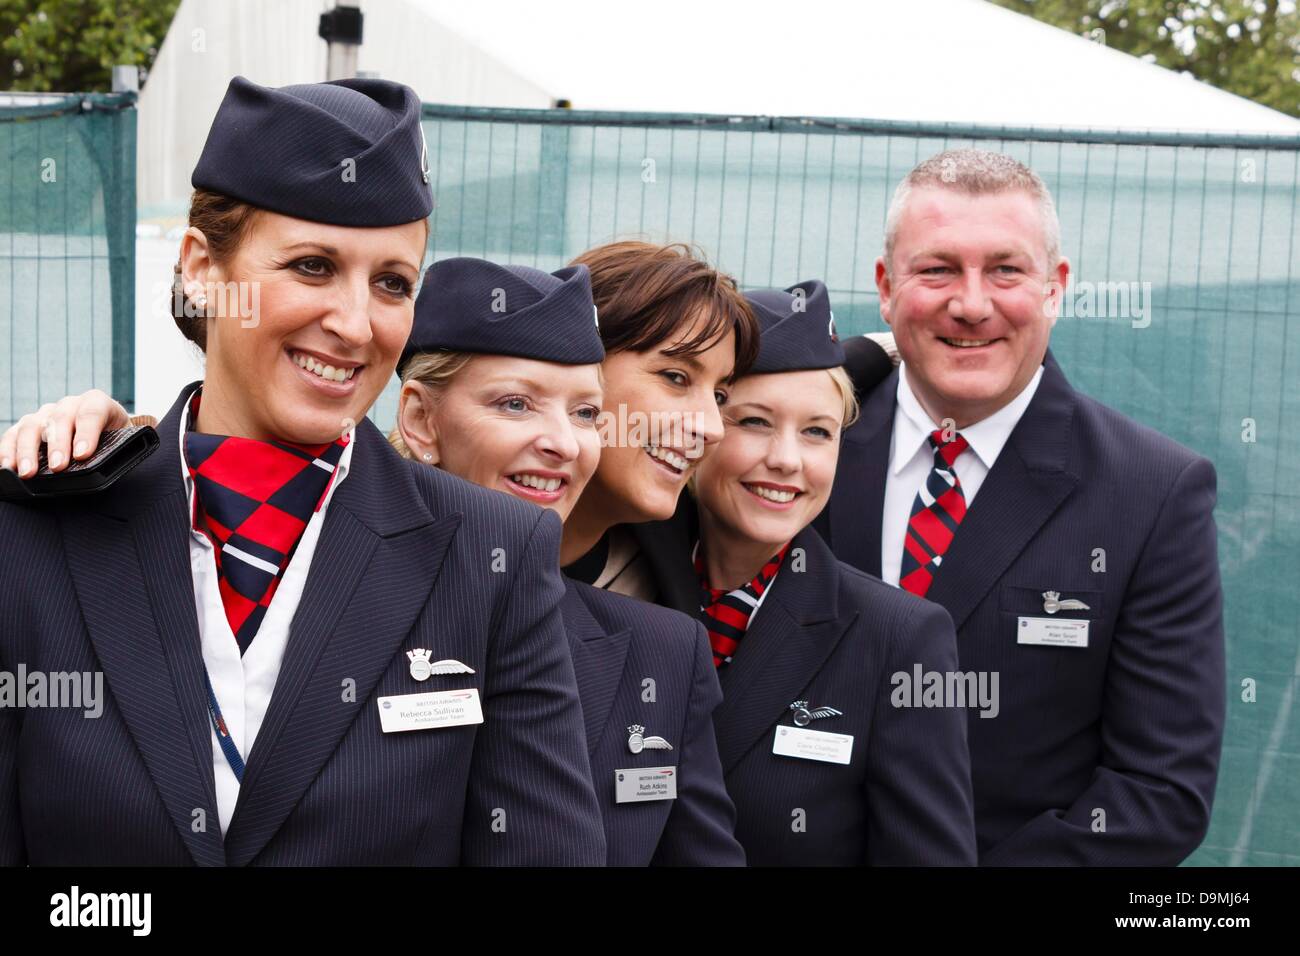 British Airways Uniform High Resolution Stock Photography And Images Alamy